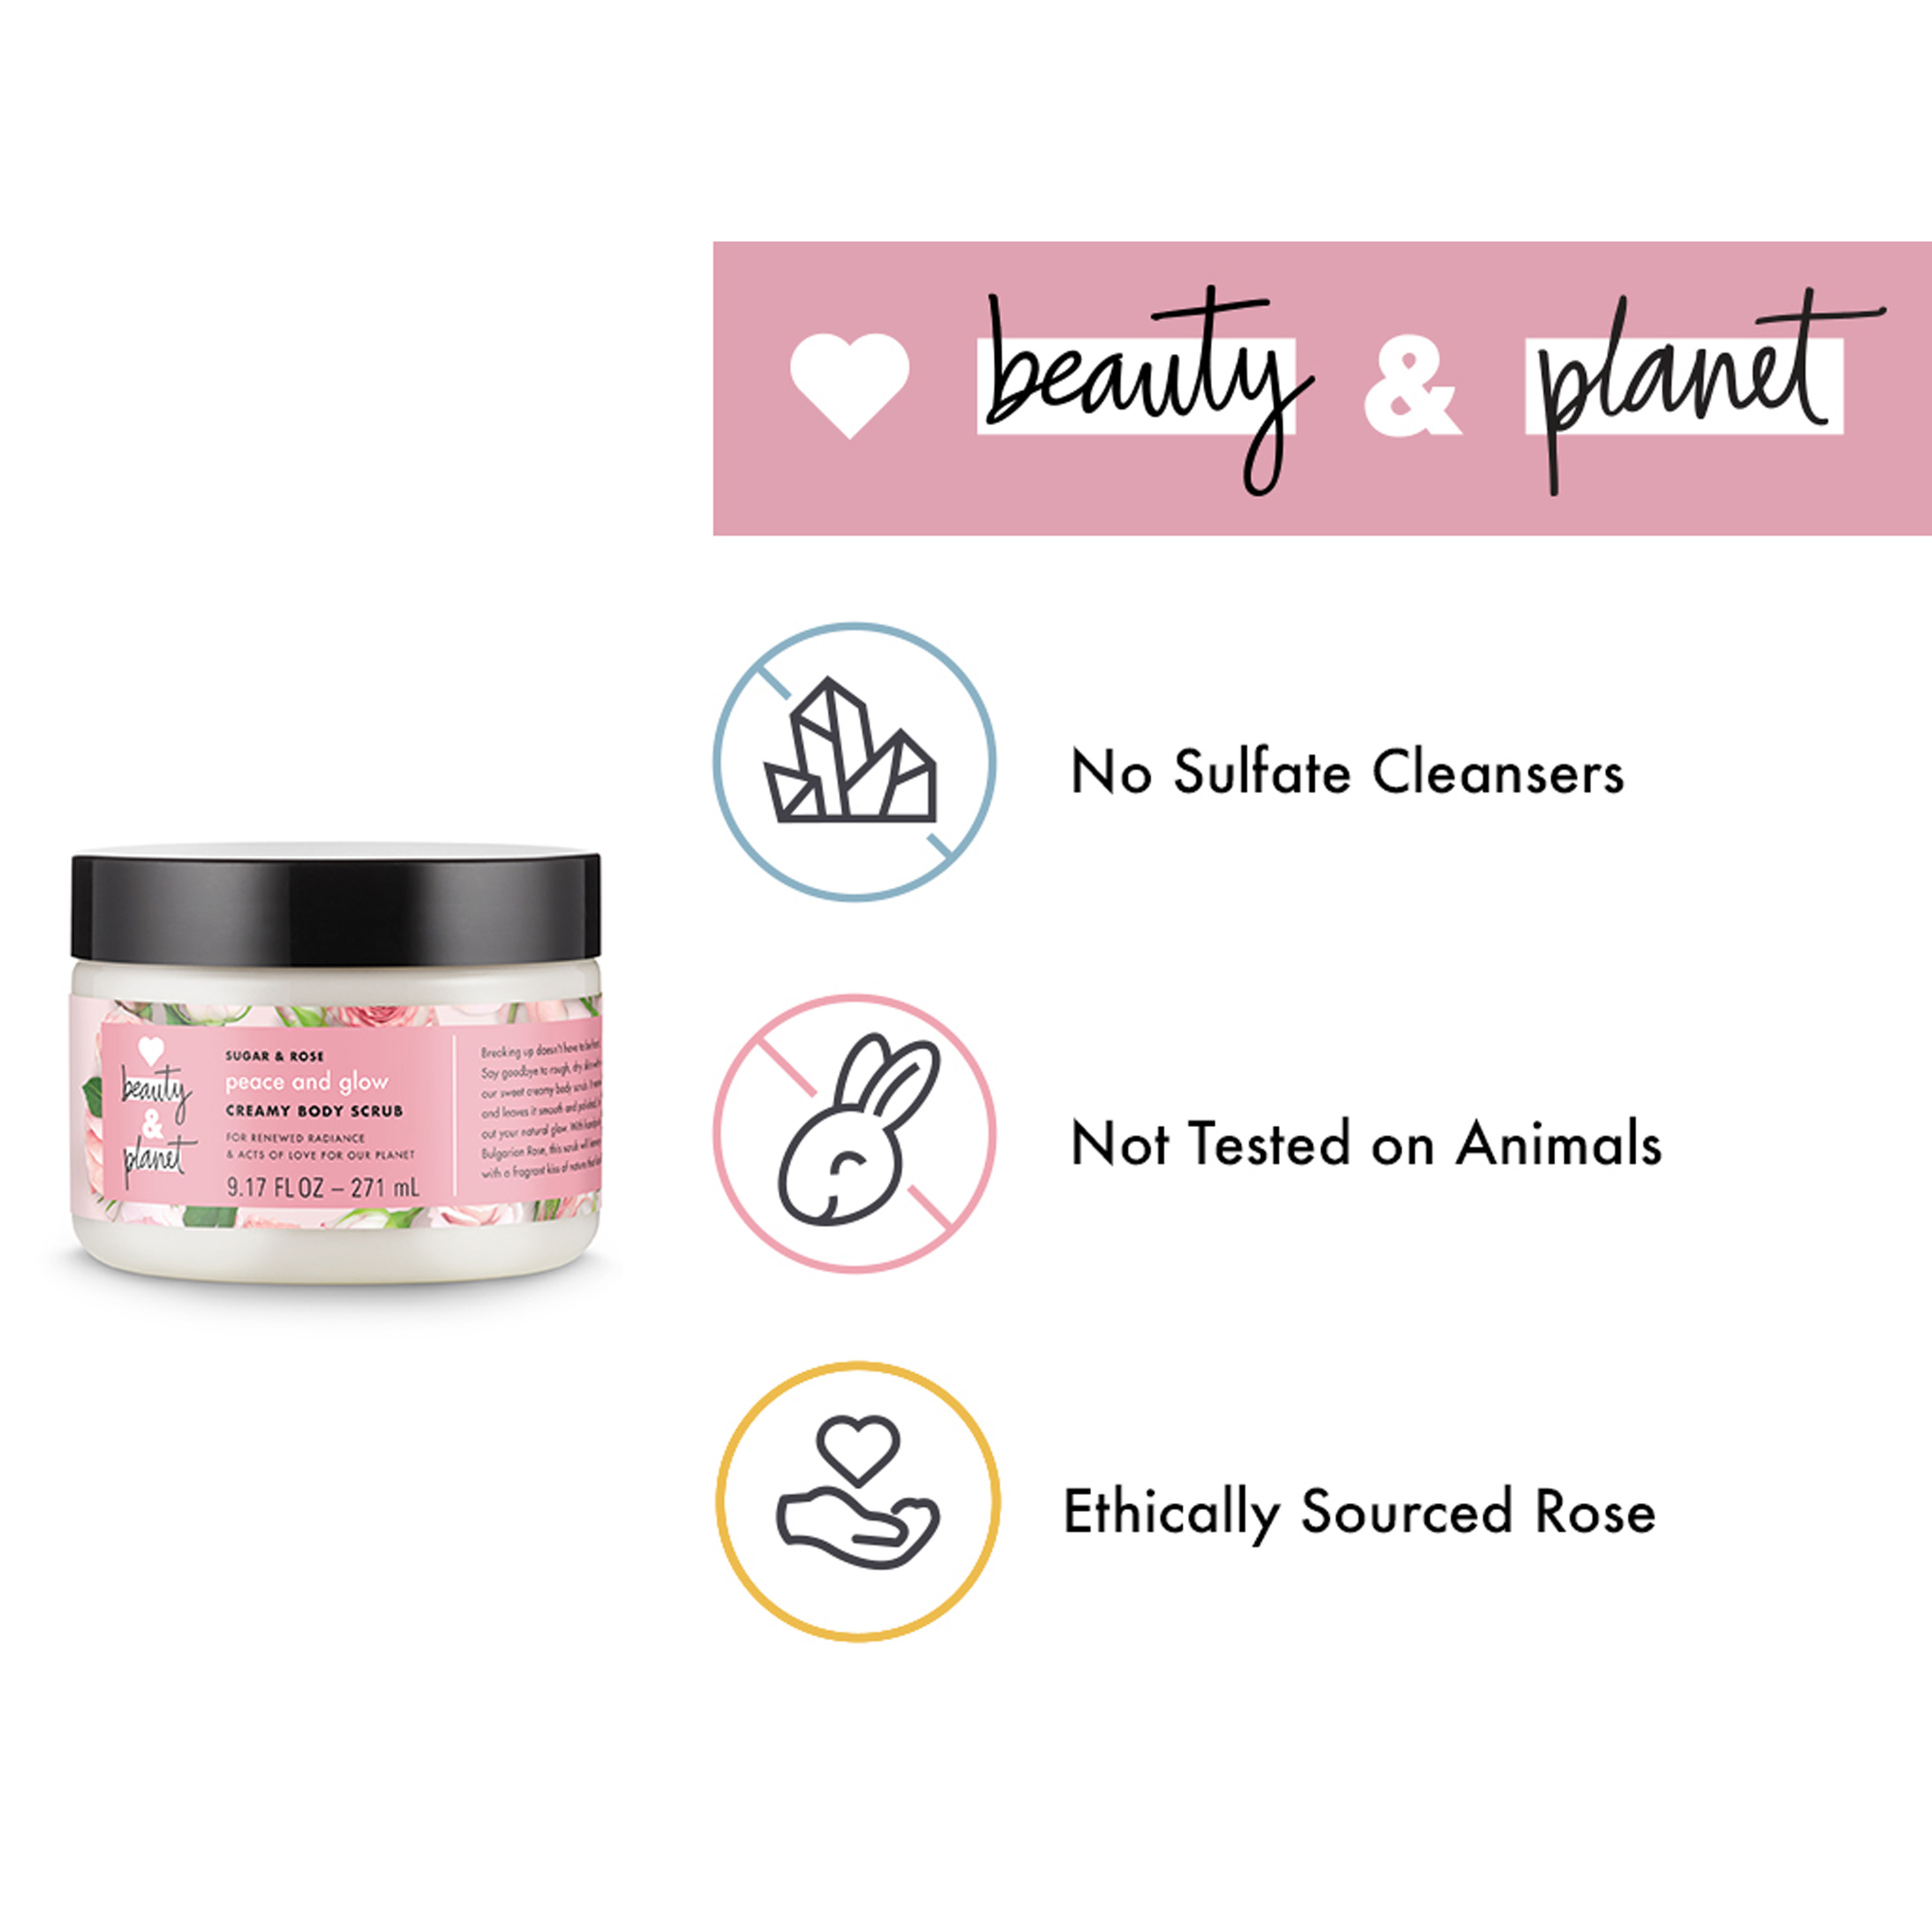 Love Beauty And Planet Sugar & Rose Scrub Creamy Exfoliating Body Scrub Peace and Glow 9.17 oz - image 6 of 13